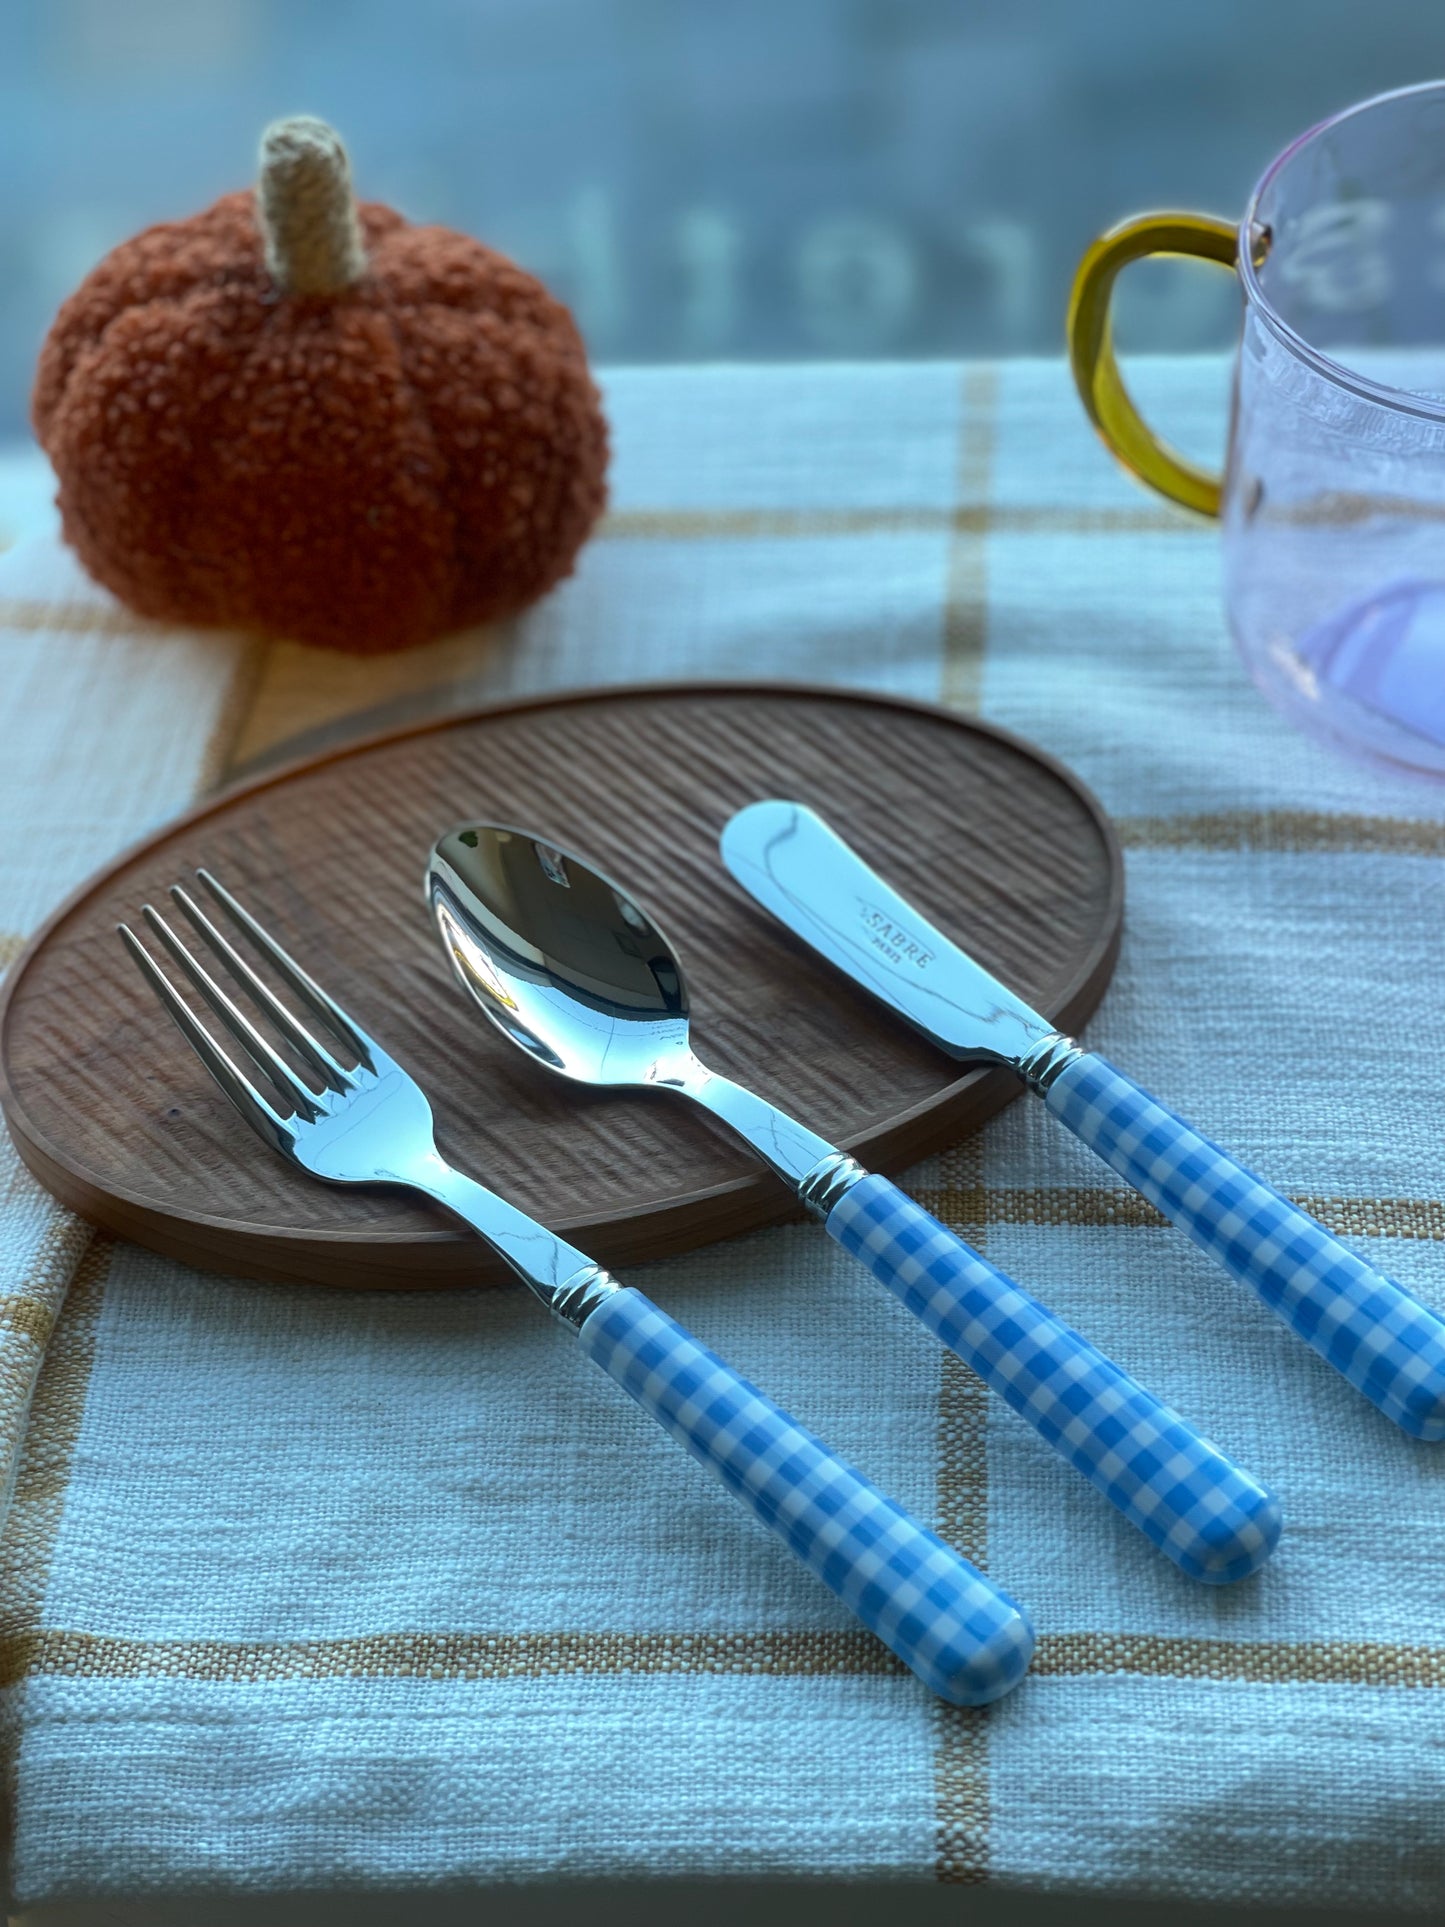 Sabre Printed Shiny Cutlery - Gingham Sky Blue